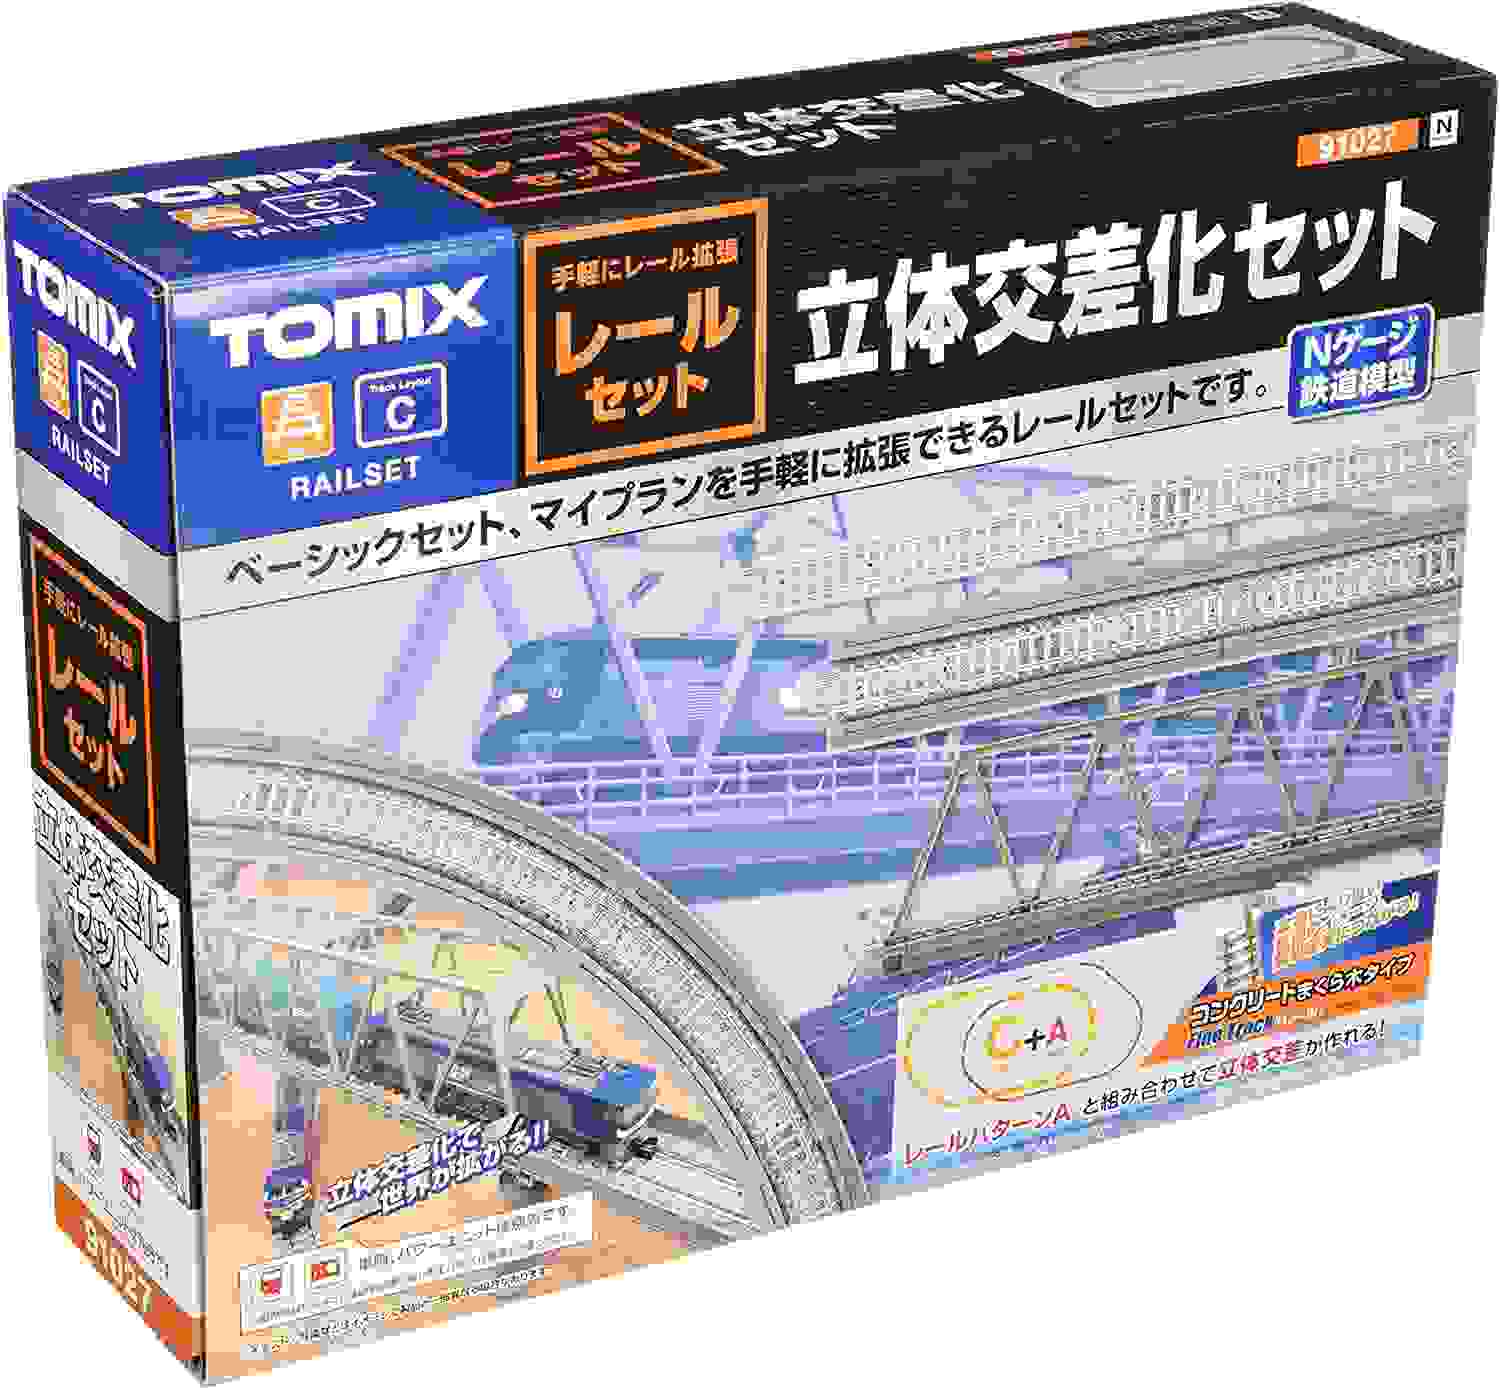 TOMIX Nゲージ レールセット 立体交差化セット Cパターン 91027 鉄道